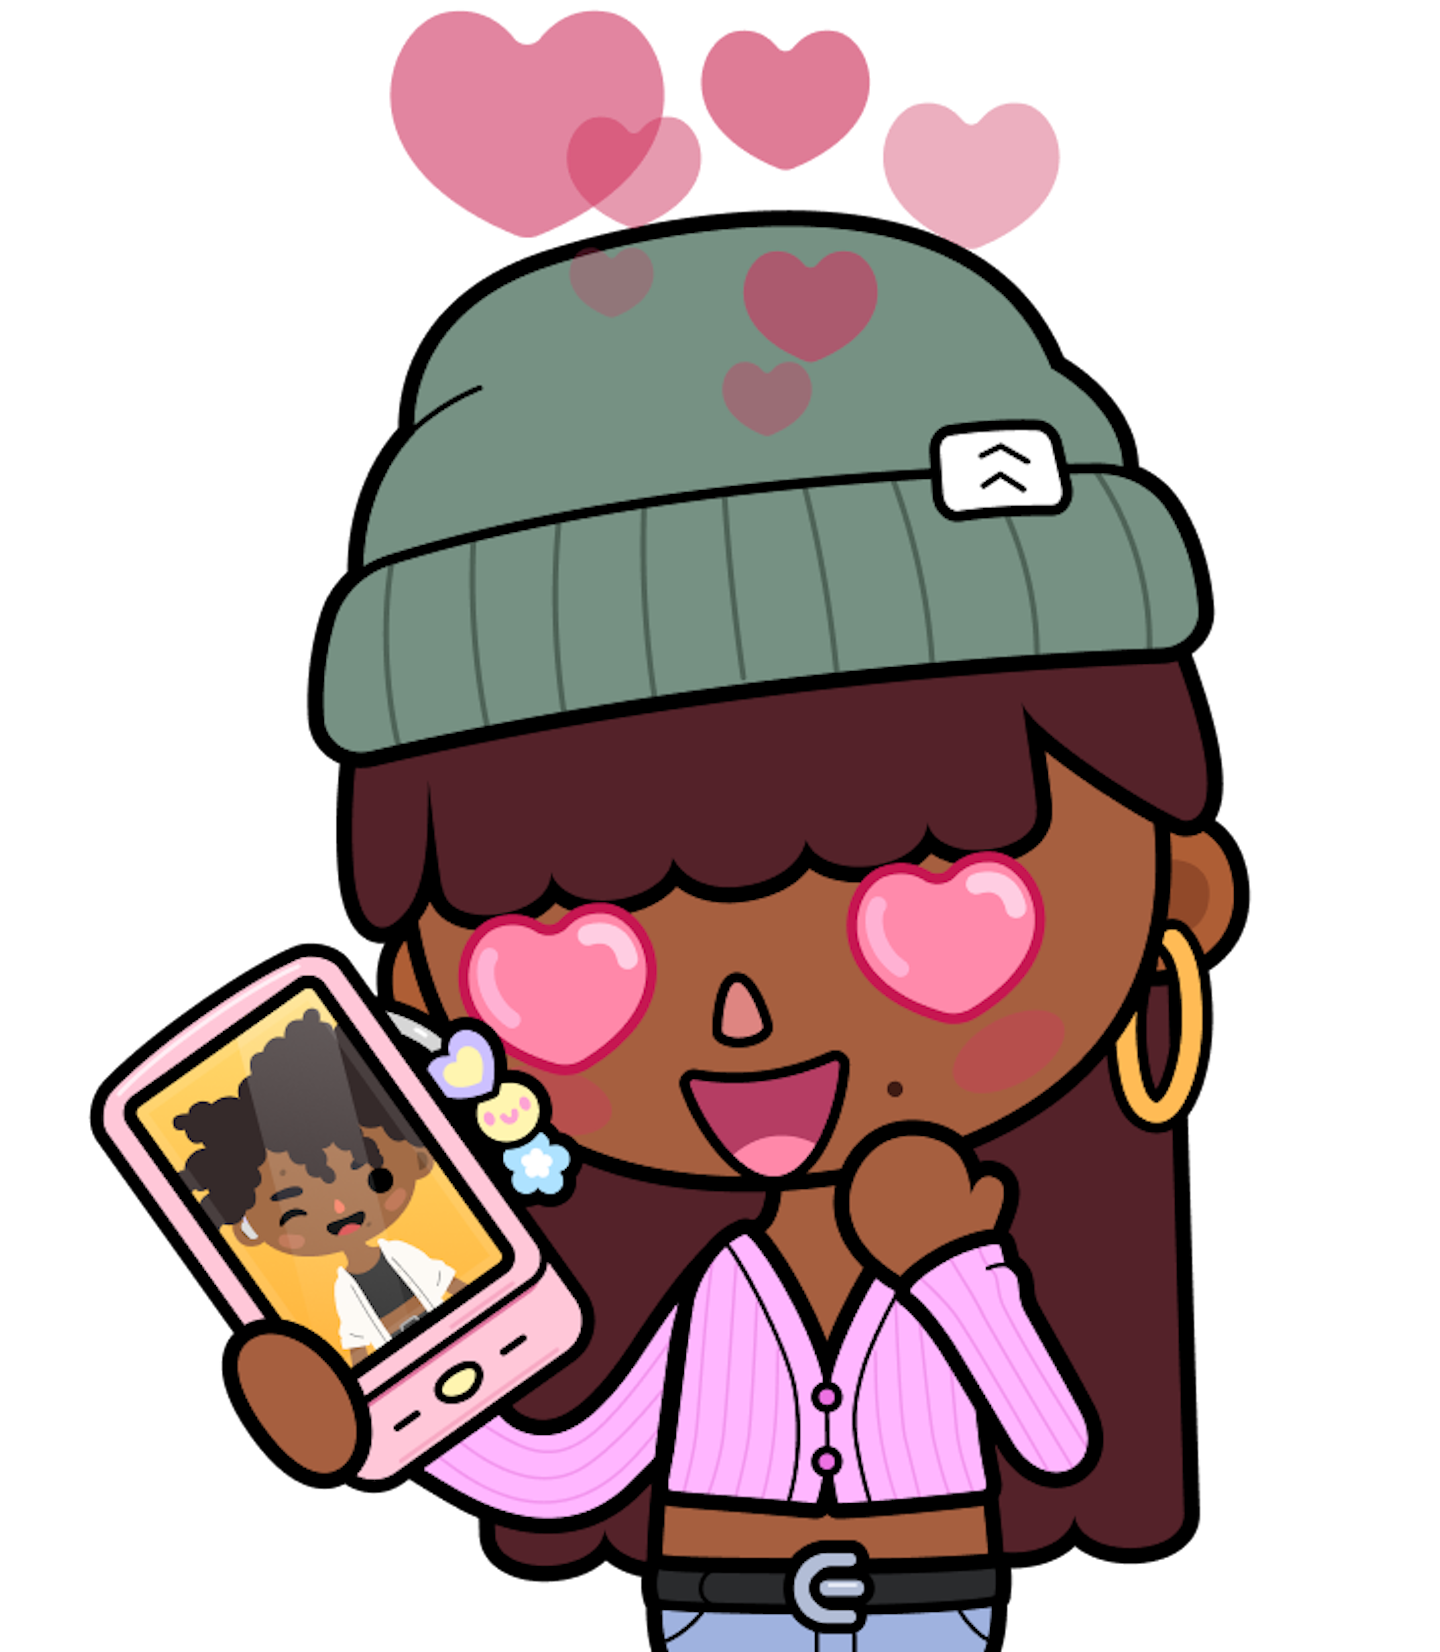 This is an image of a girl in the Toca World art style holding a phone with an image of a boy and she has heart emoji eyes